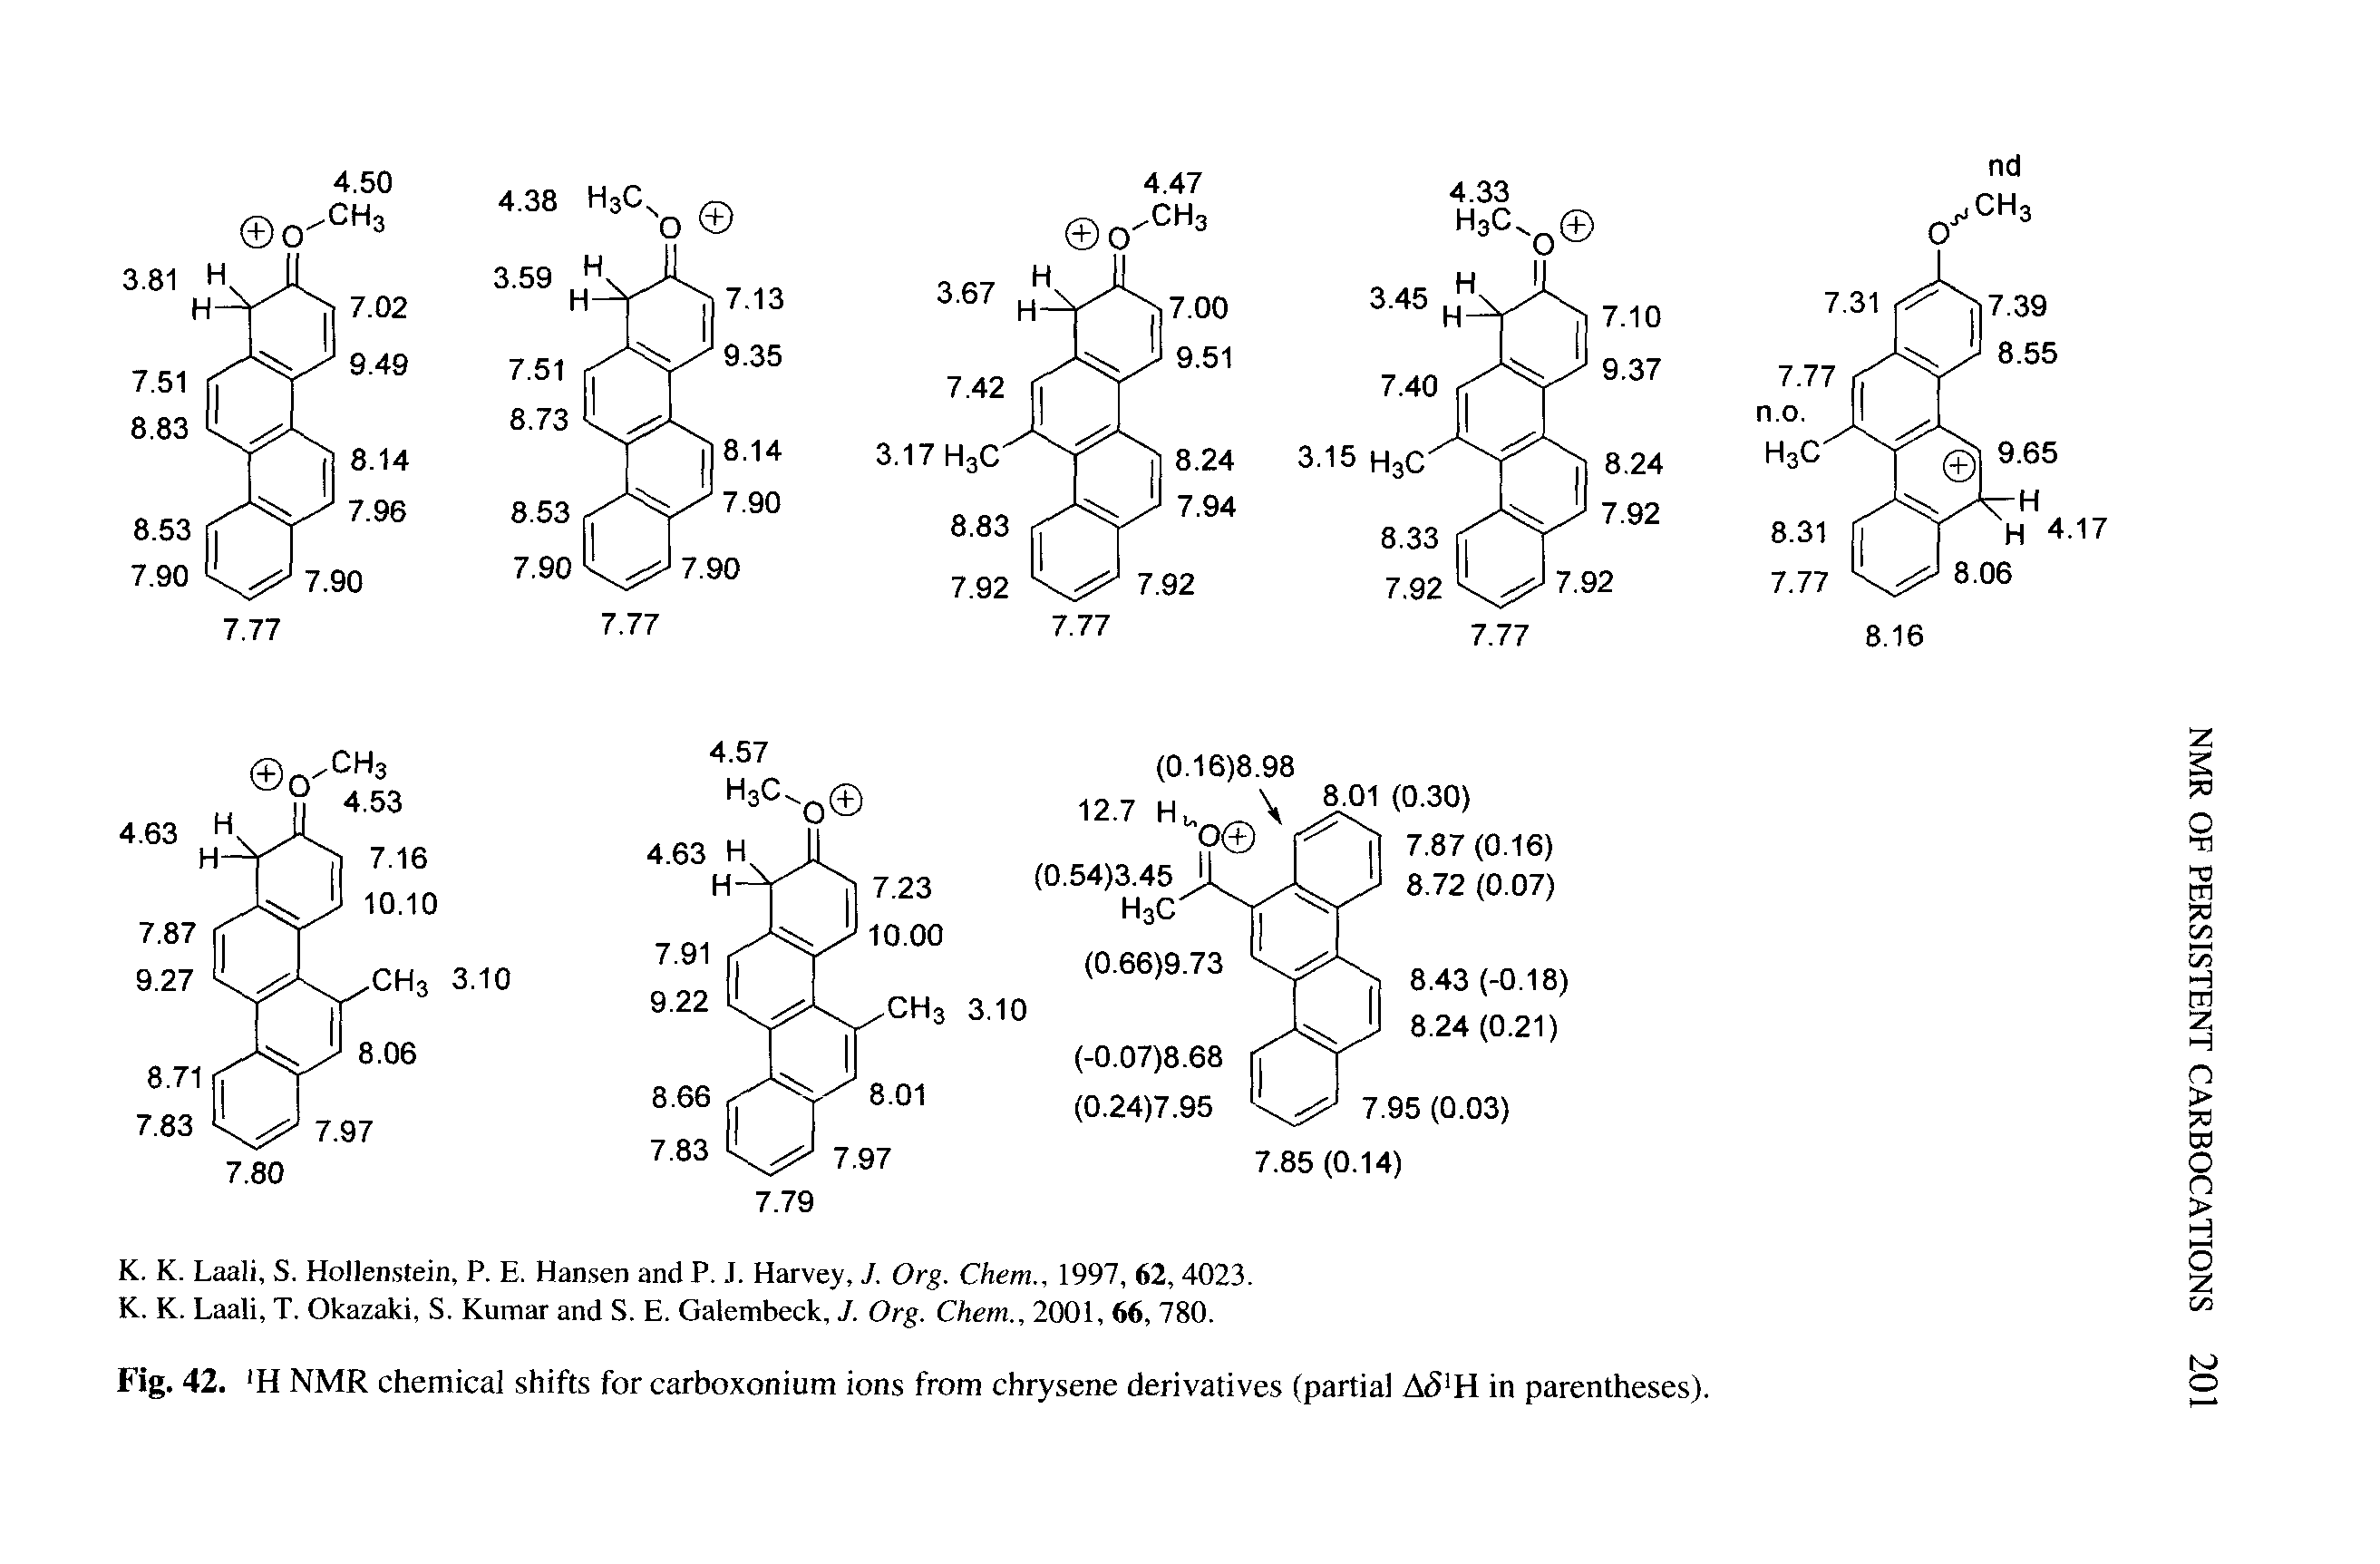 Fig. 42. H NMR chemical shifts for carboxonium ions from chrysene derivatives (partial A5 H in parentheses).